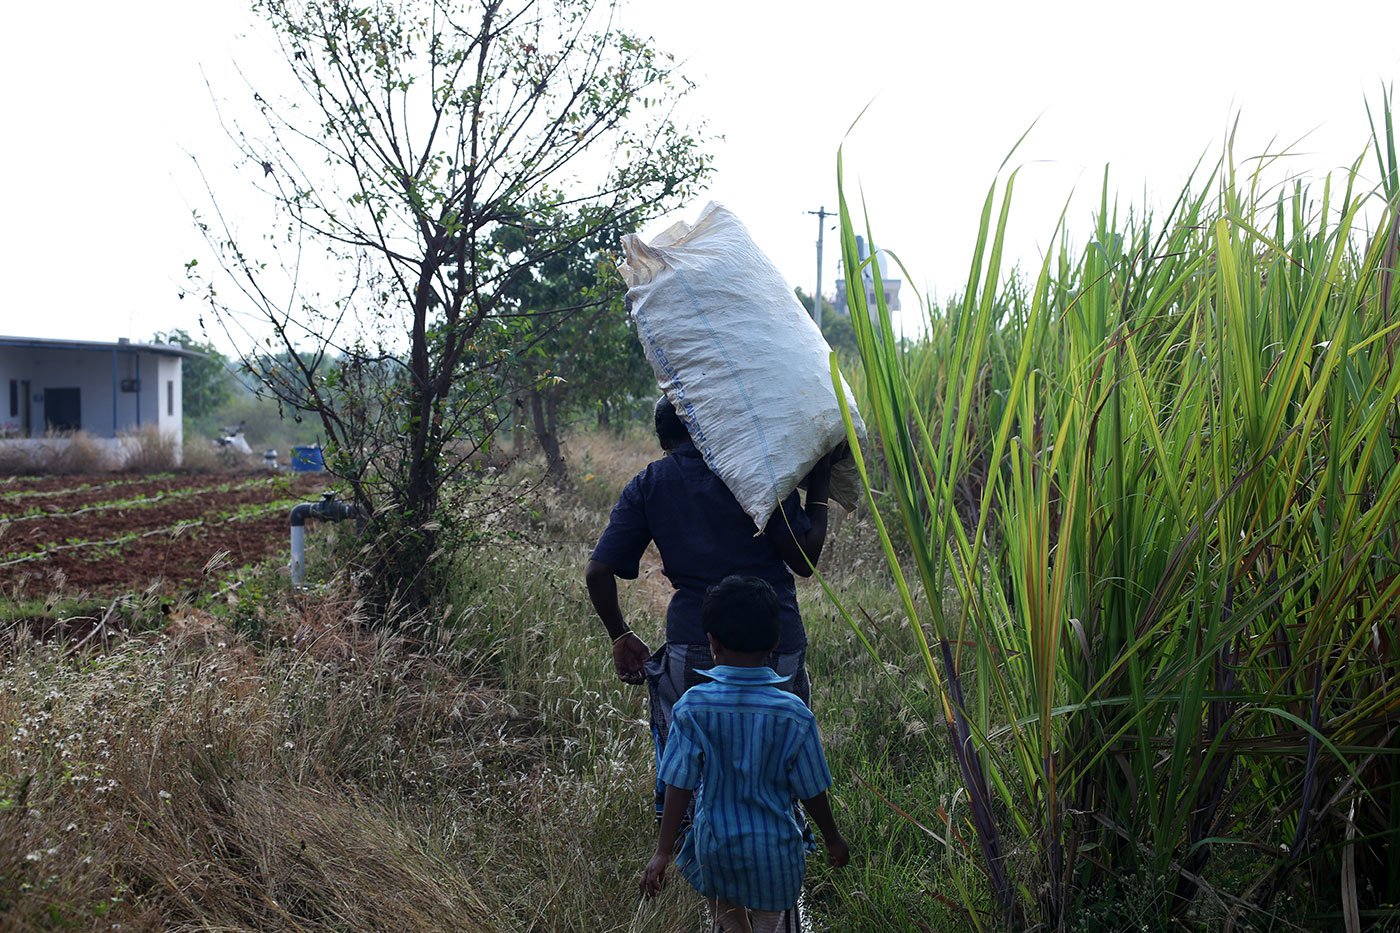 Iniya walks behind, as her mother carries home a sack of produce